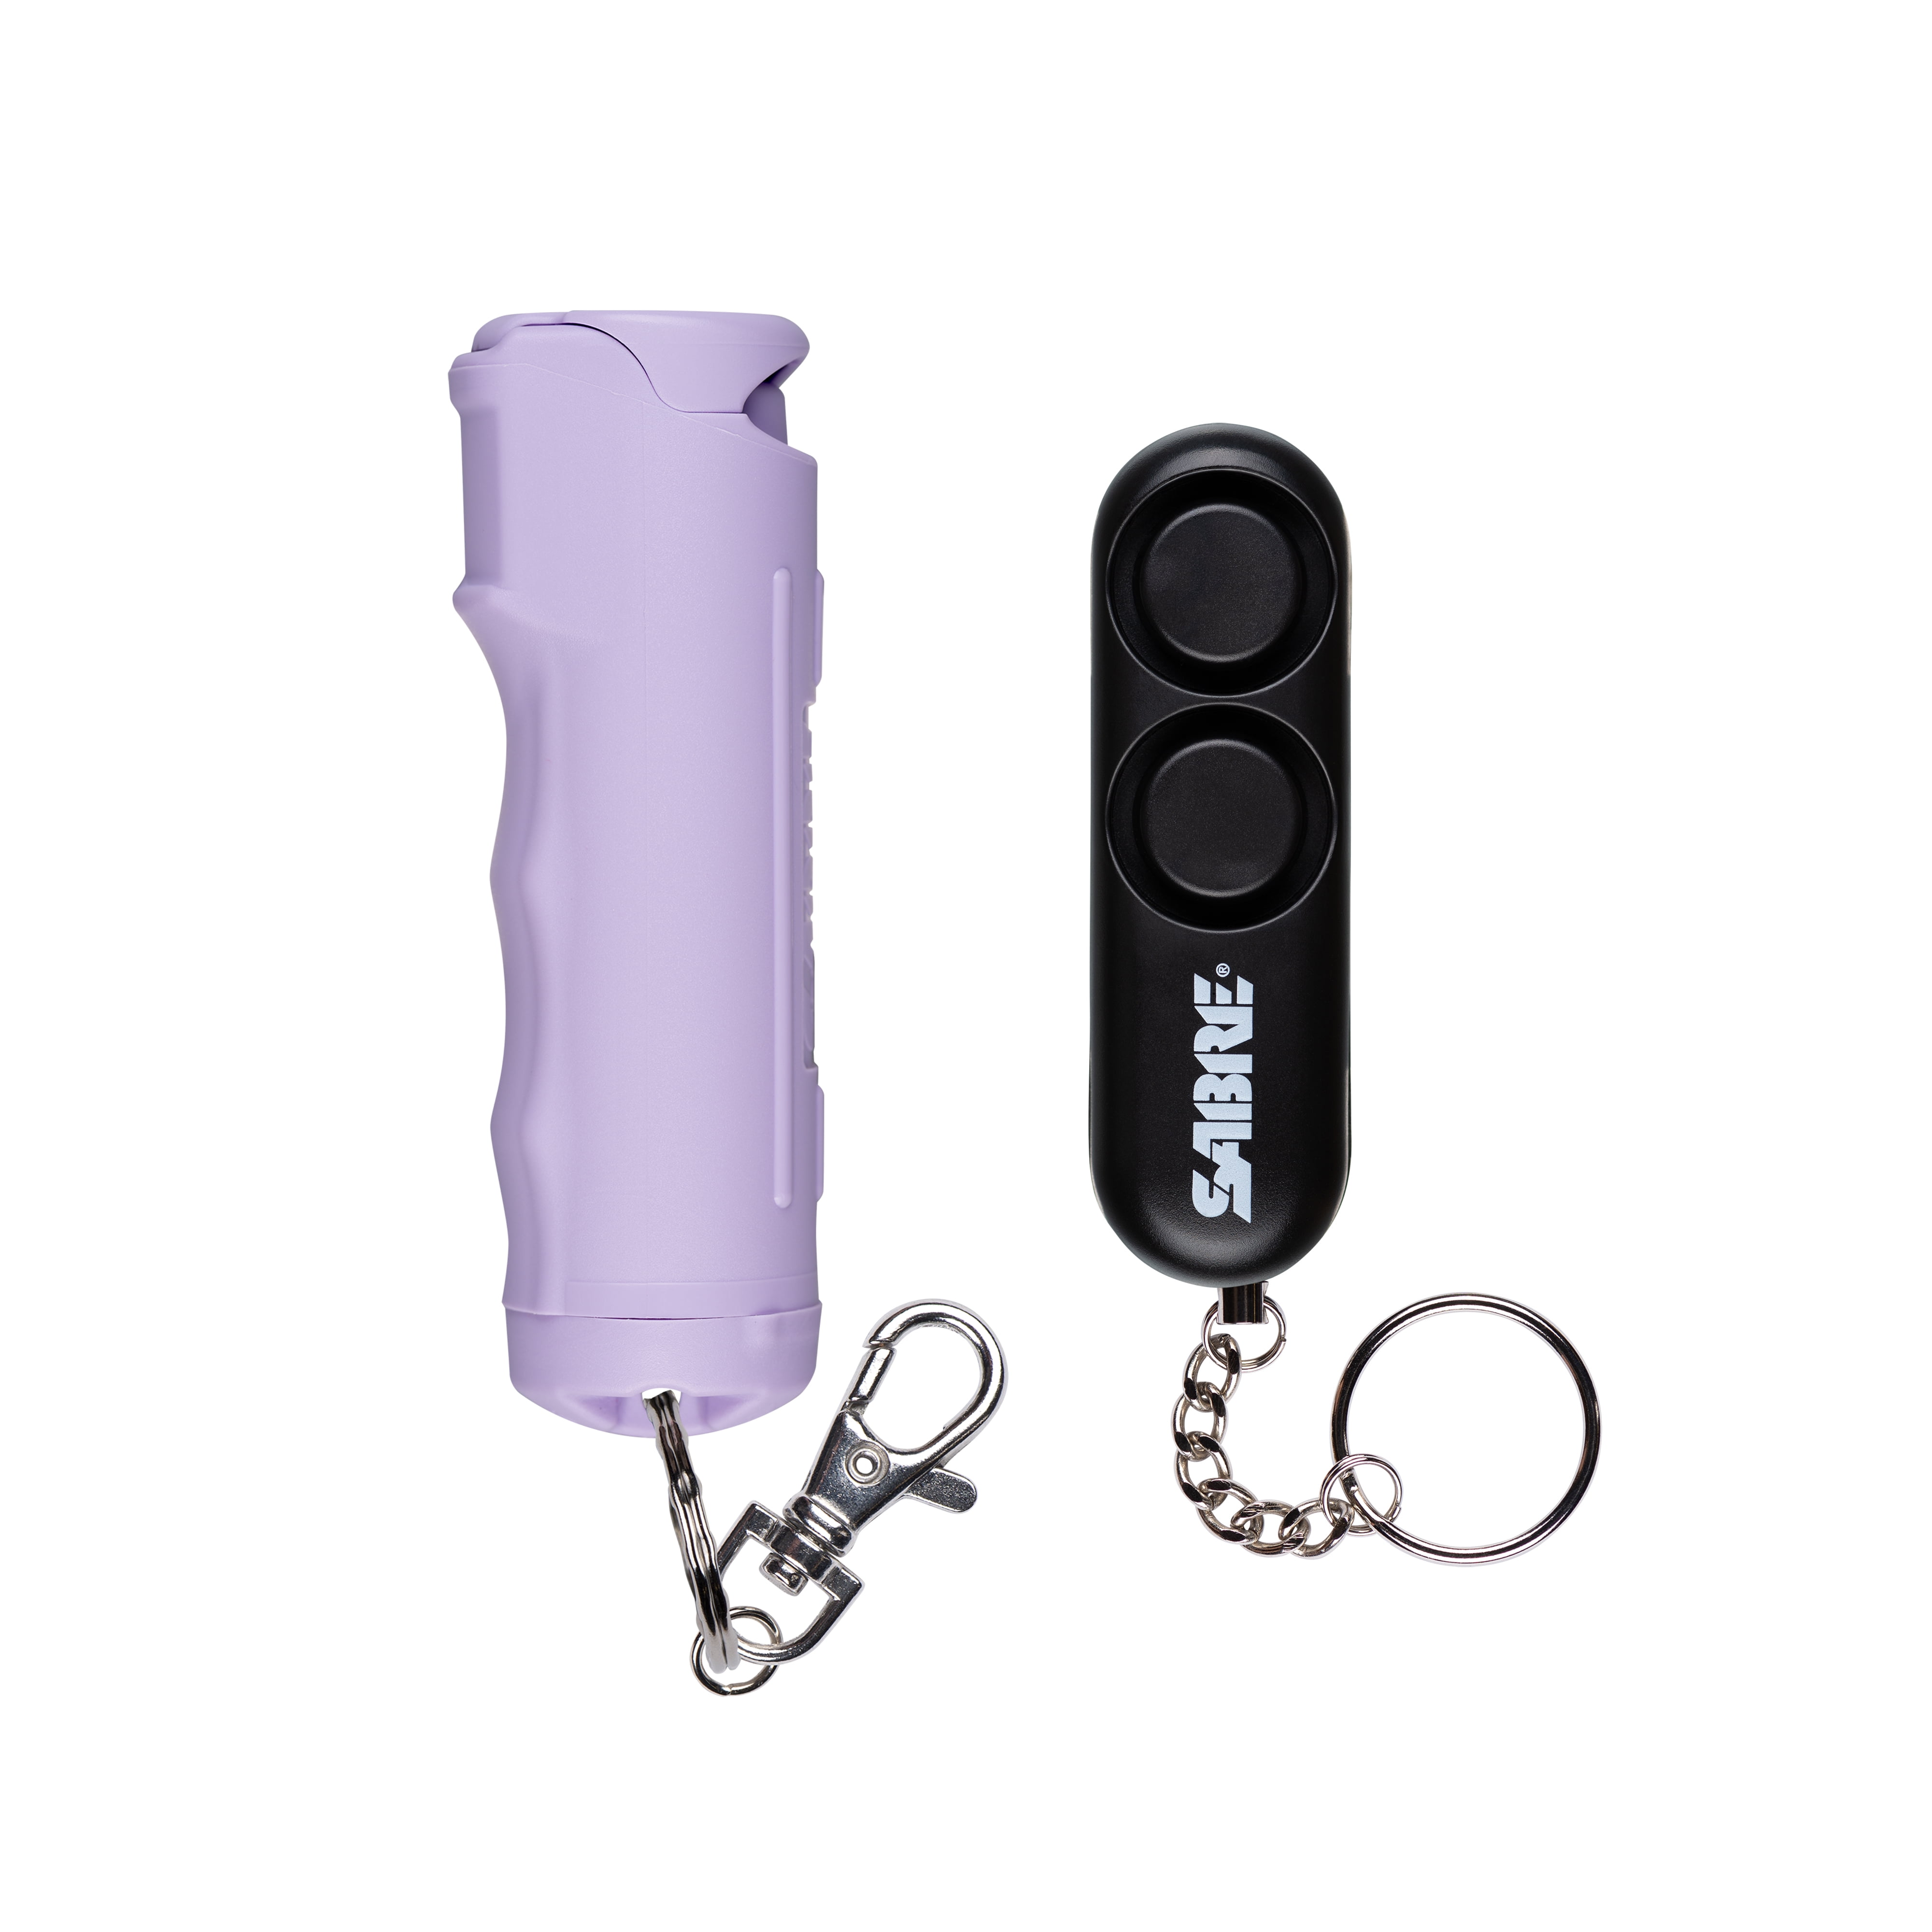 SABRE Pepper Gel and Personal Alarm Kit, Snap Clip and Key Ring for Easy Access